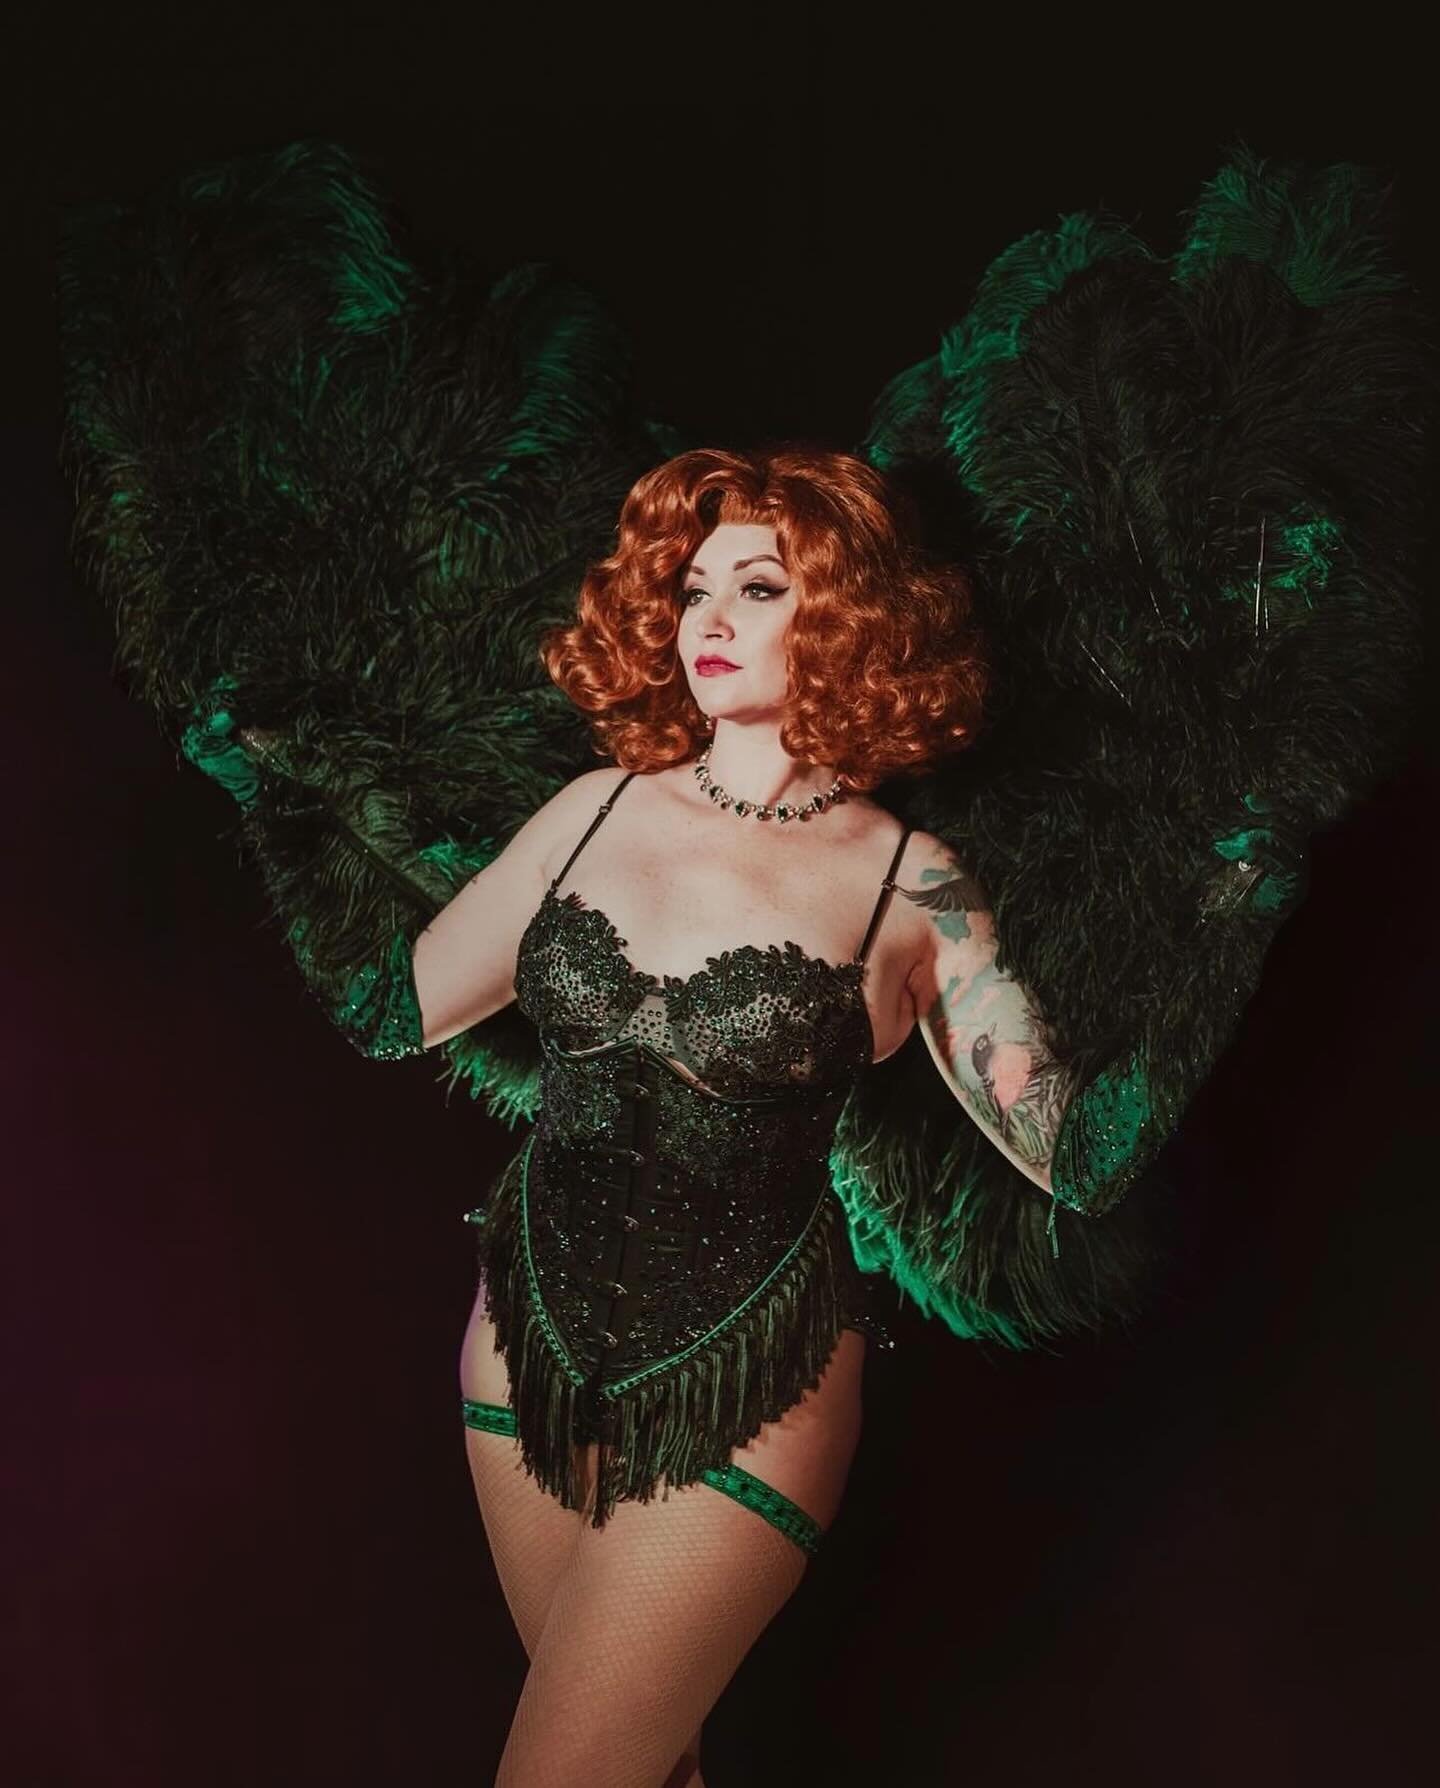 ✨ Ridiculesque Performer Spotlight ✨ 

We are absolutely thrilled to bring Autumn Leaves aka @mel_hy19 all the way from Nashville for Ridiculesque! This superstar traveling showgirl has been touring her pretty possum act (no really, see the last two 